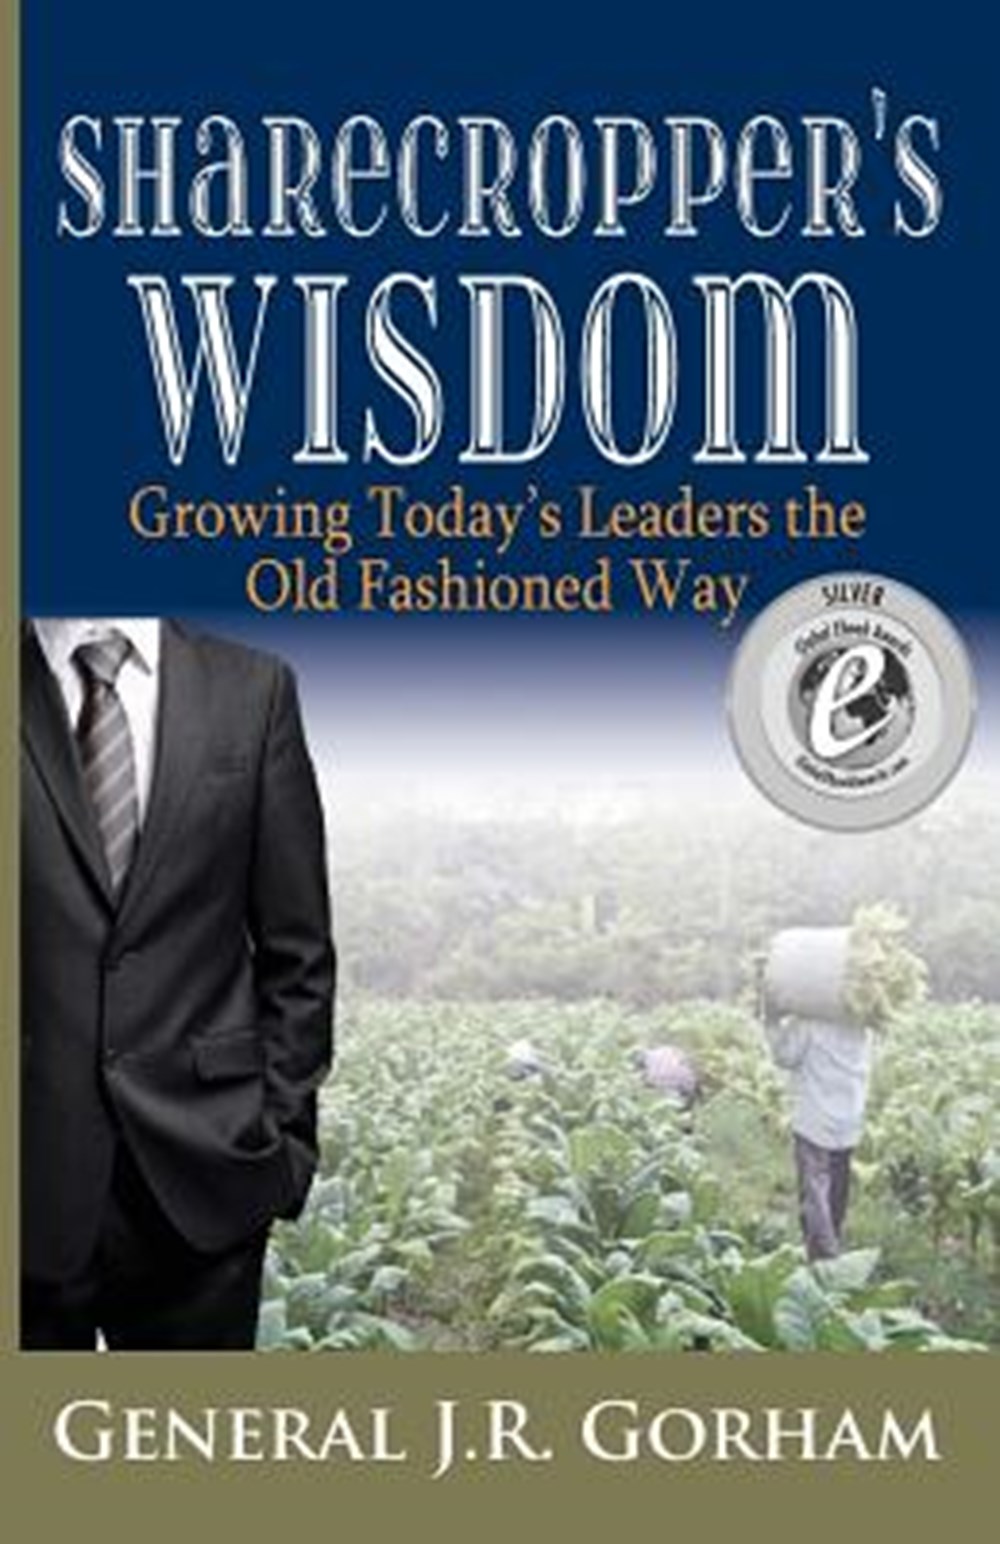 Sharecropper's Wisdom Growing Today's Leaders the Old Fashioned Way